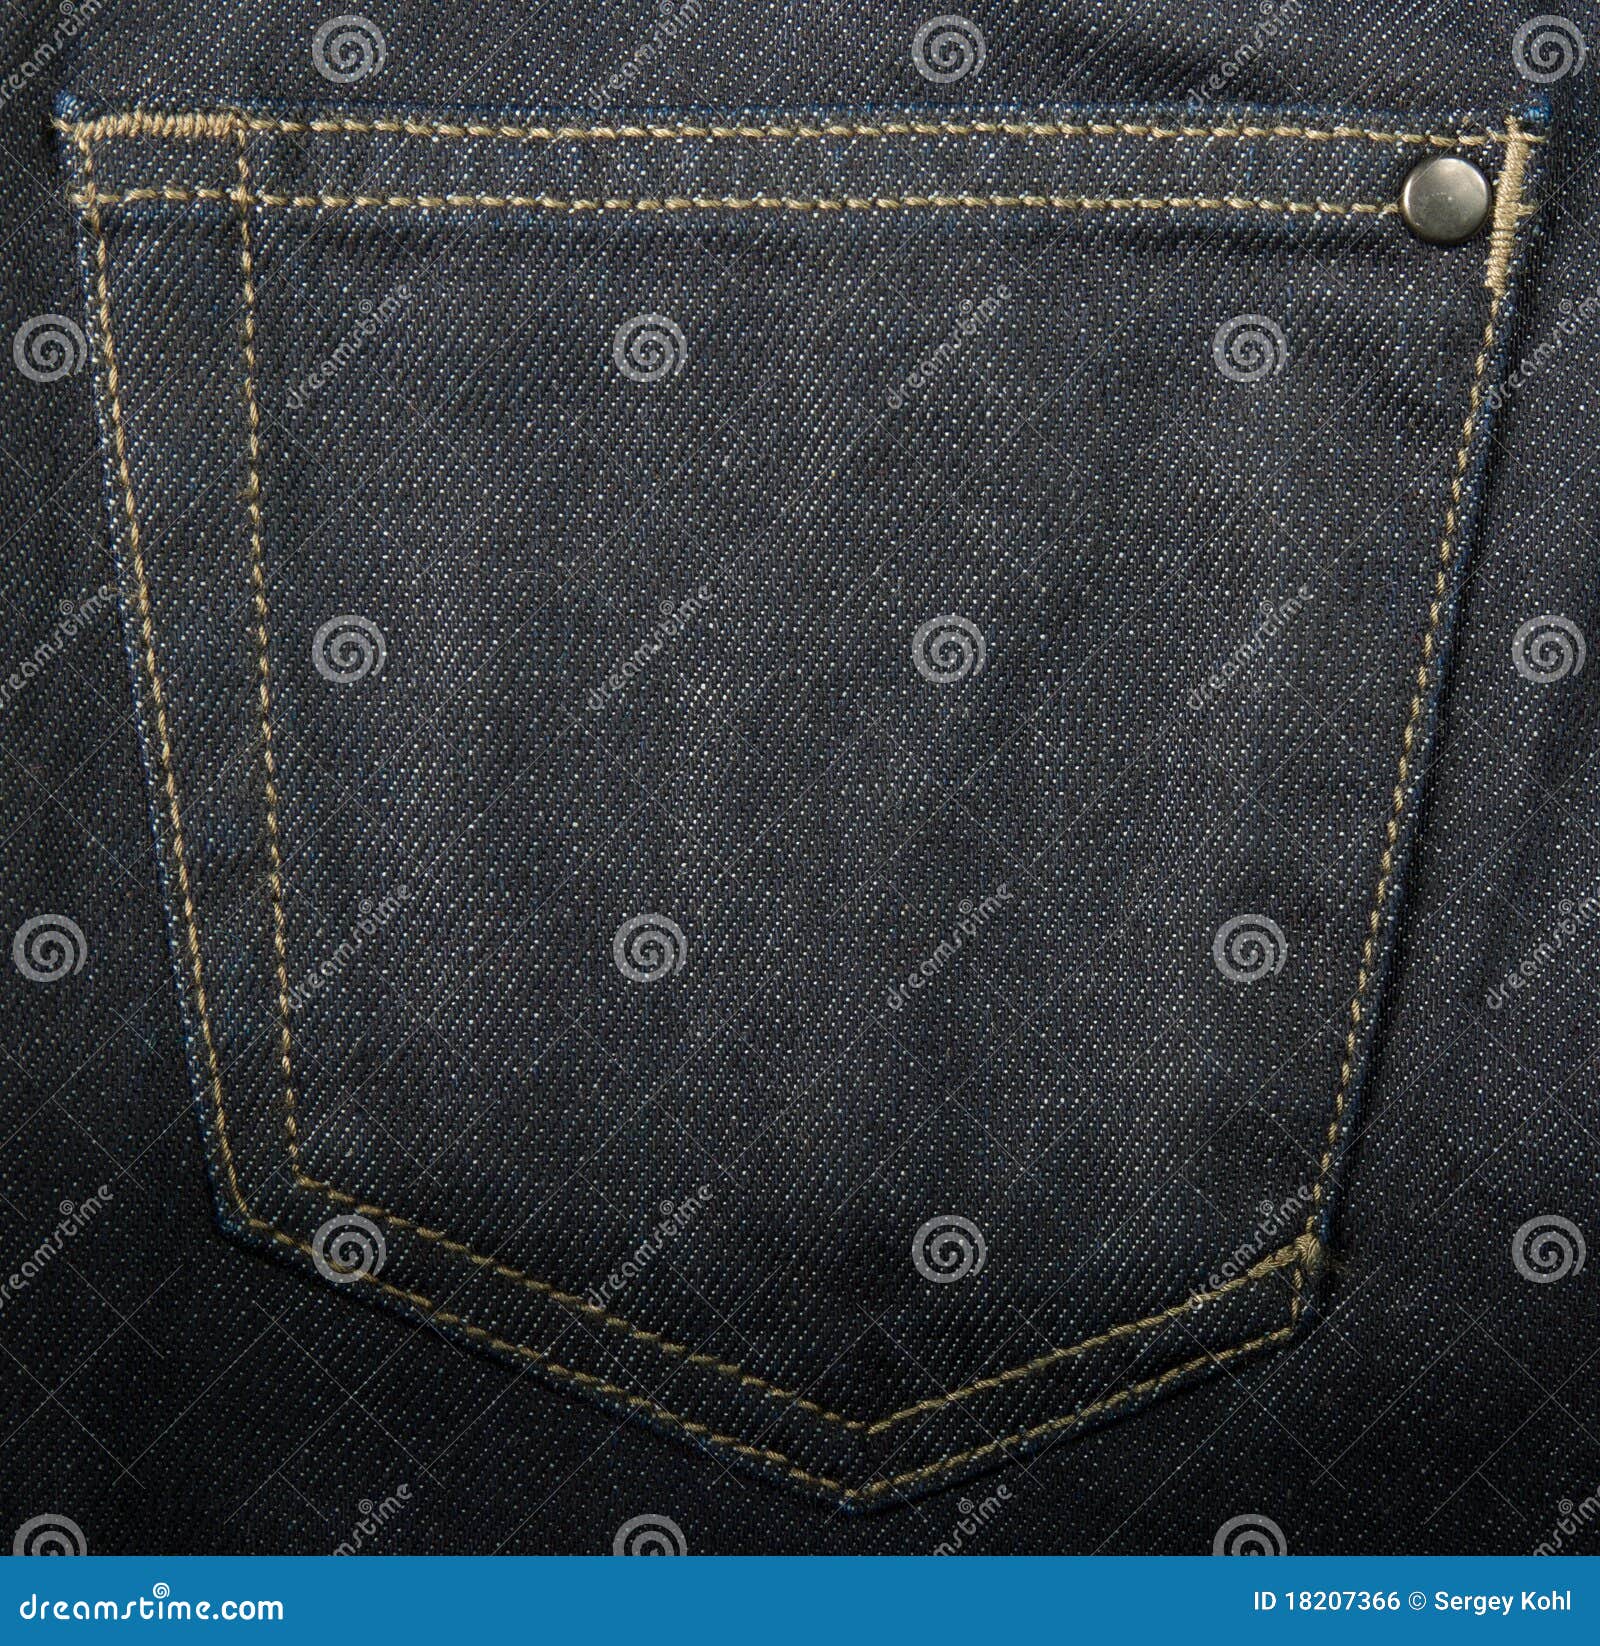 Back pocket of jeans. stock photo. Image of jeans, fashion - 18207366